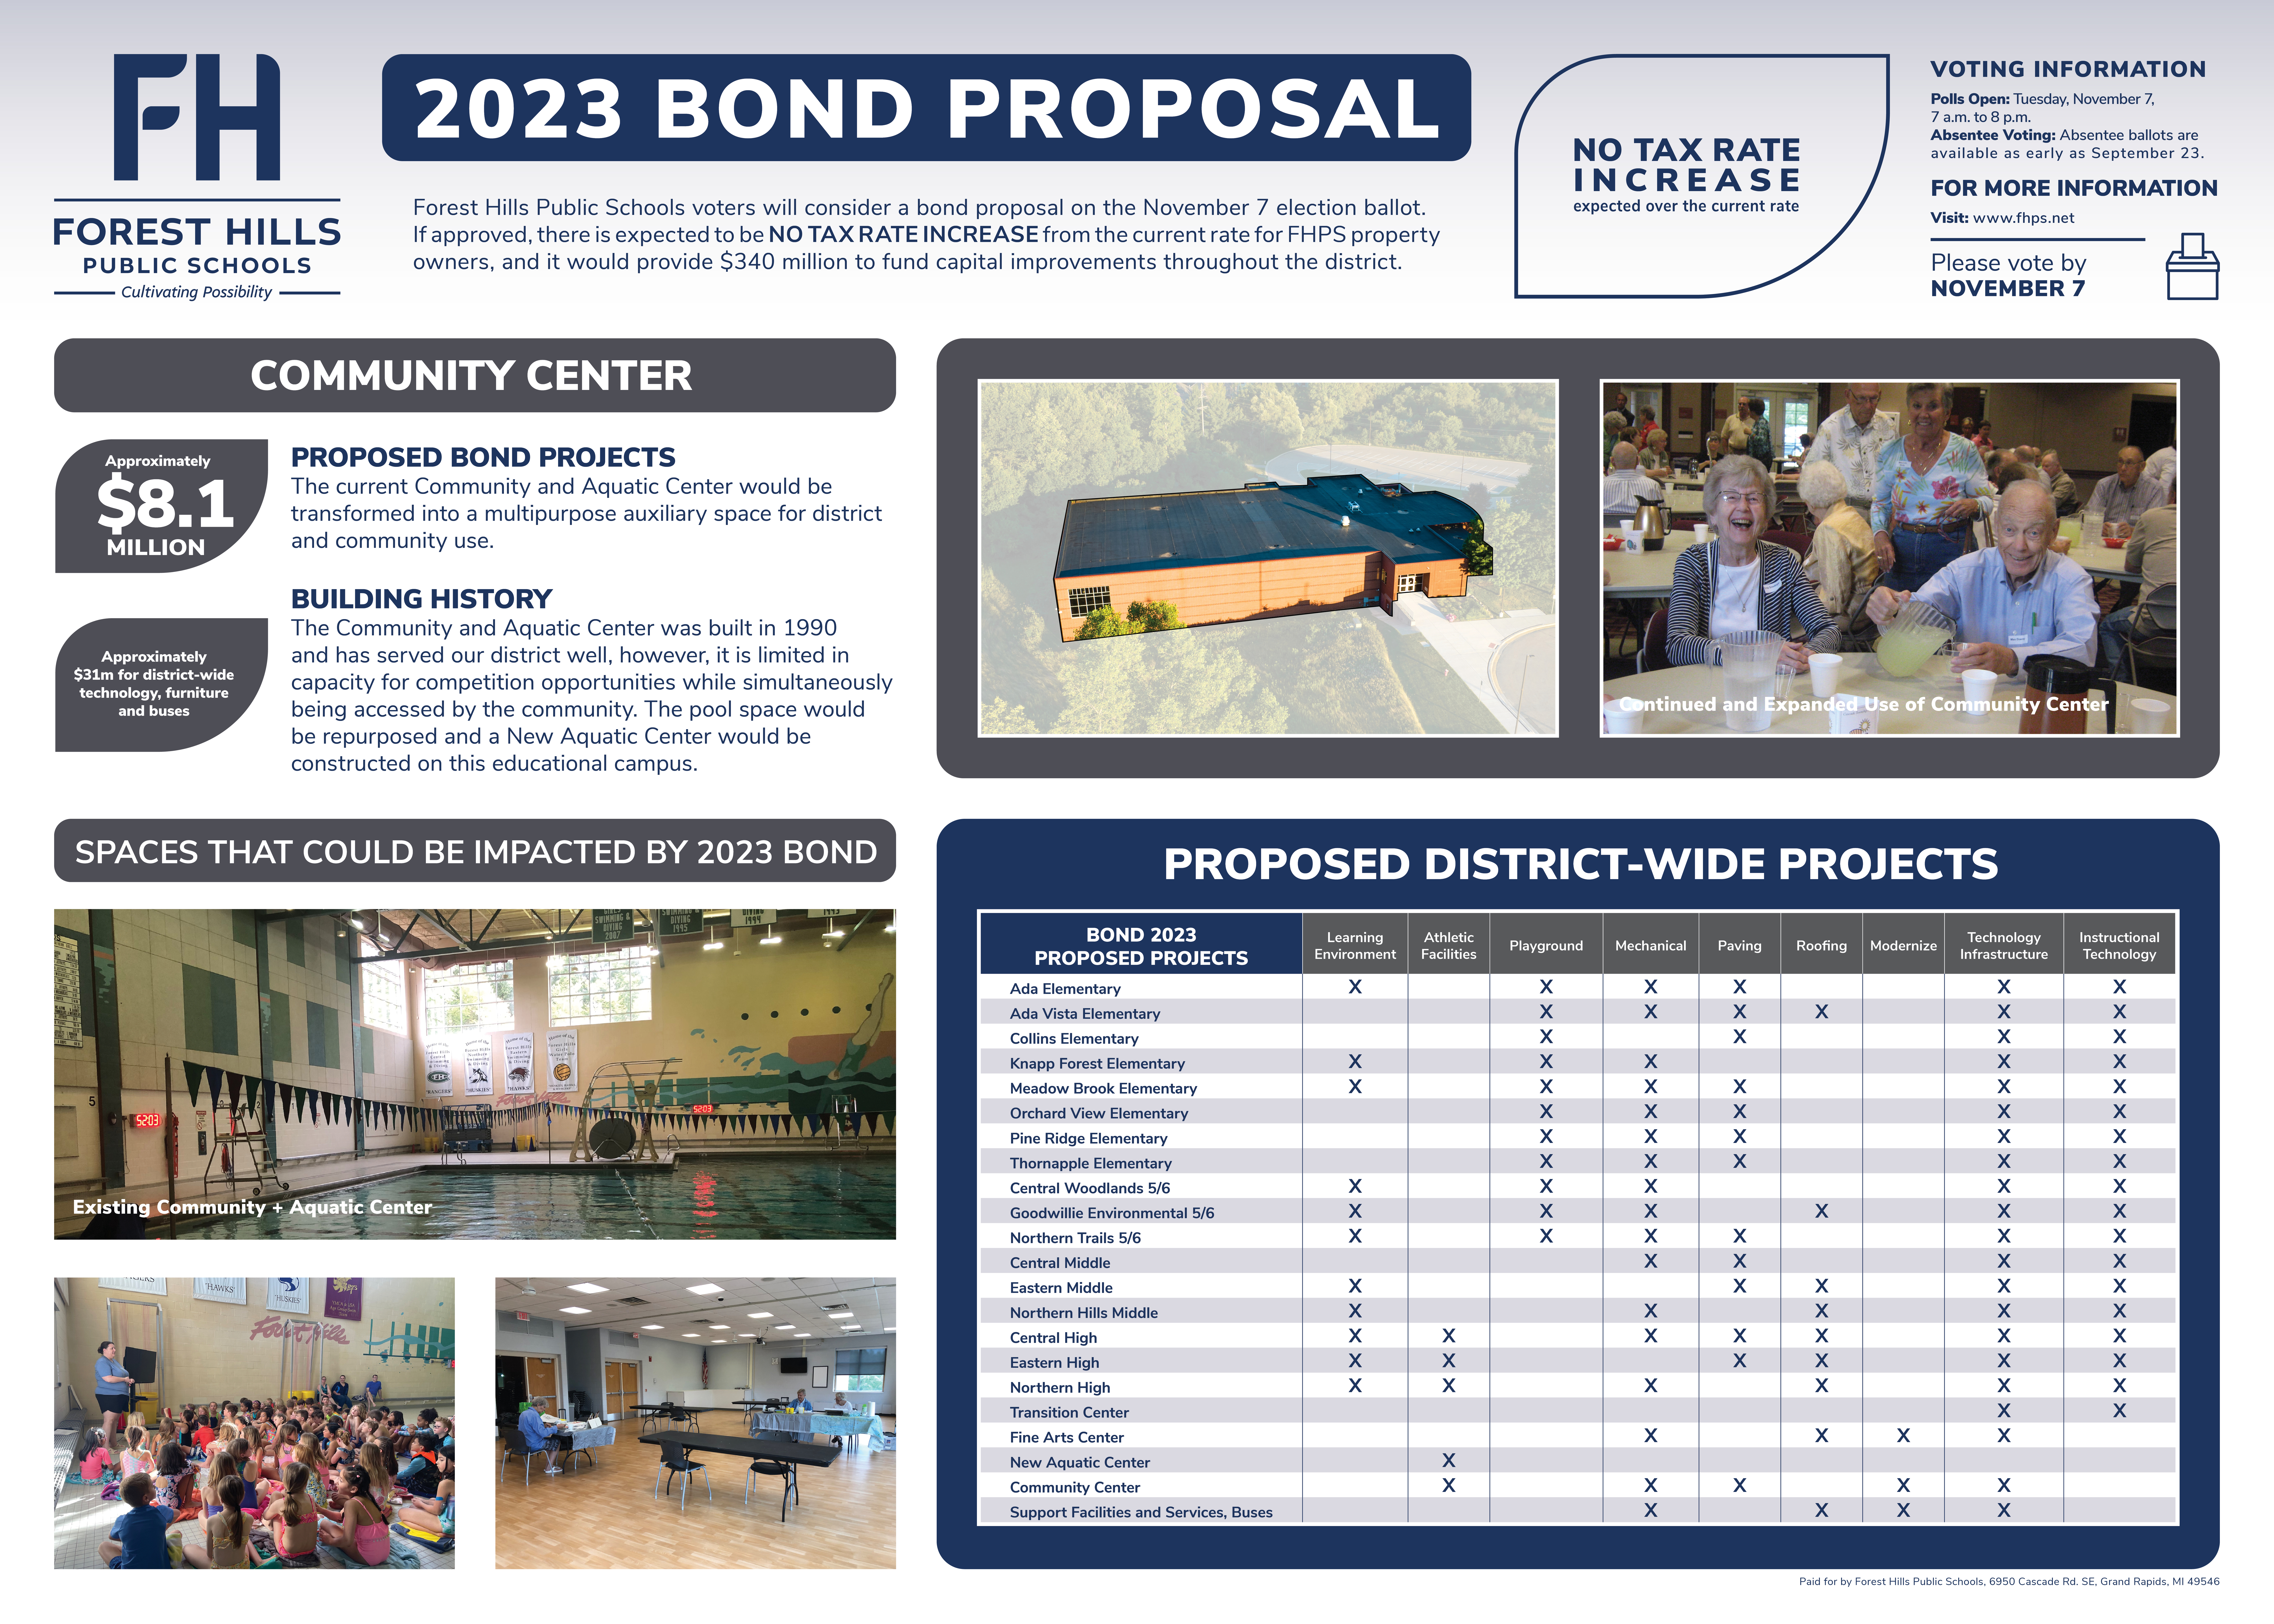 Existing community and aquatic center and pictures of the existing building and bond project pictures from 2018 and spaces that could be impacted by the 2023 bond.